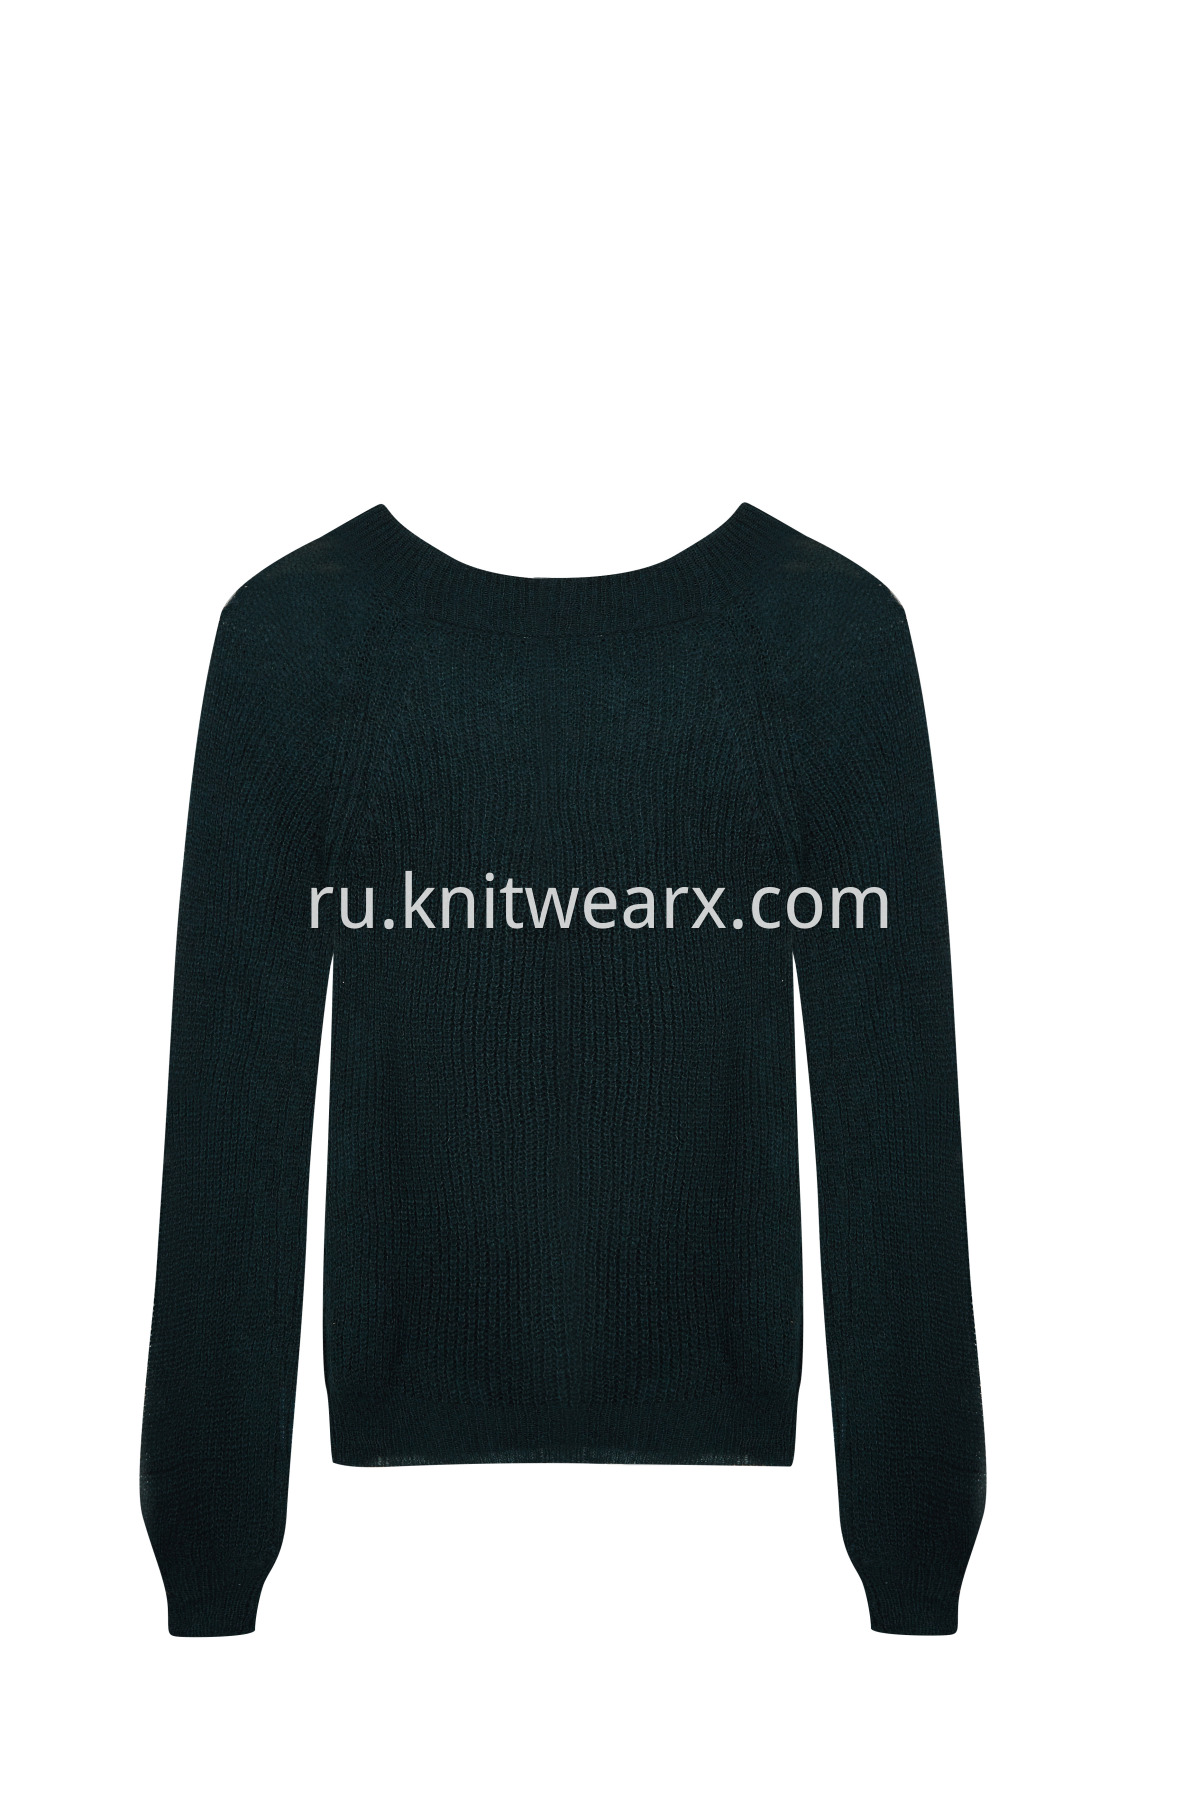 Women's Mohair Loose knitted Crew Neck Tops Sweater 